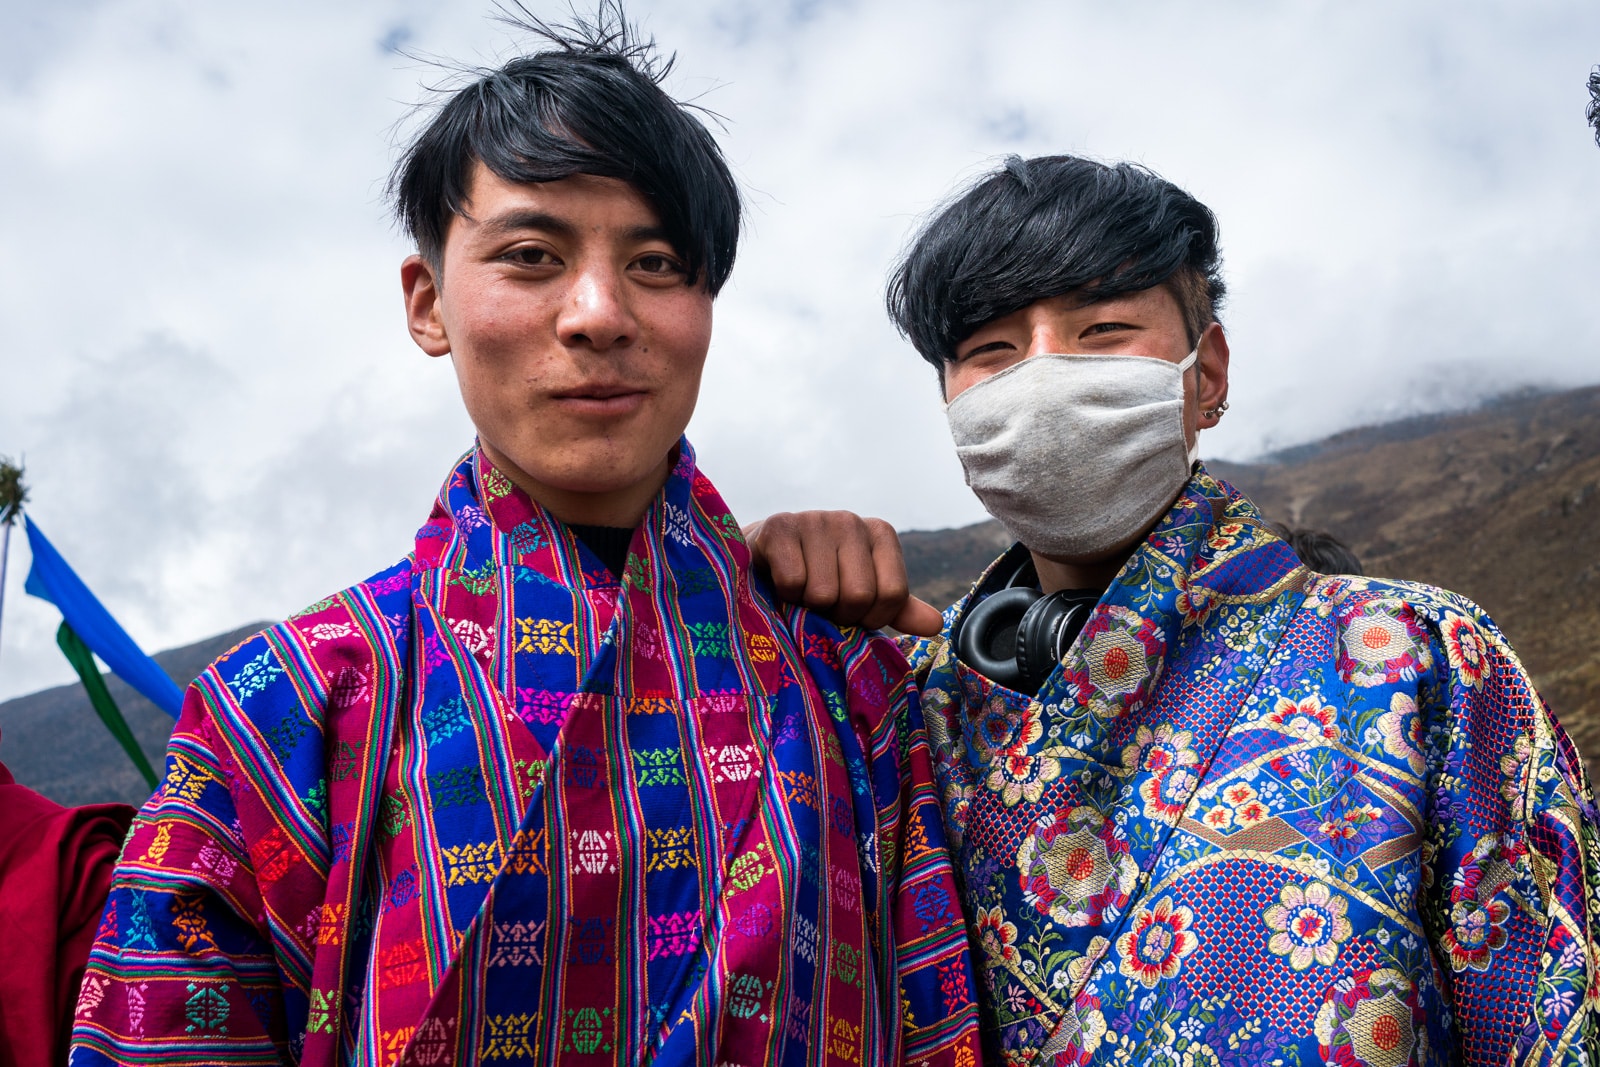 Photos of the 2017 Royal Highlander Festival in Bhutan - Young hip boys posing in colorful patterned gho, traditional male Bhutanese dress - Lost With Purpose travel blog